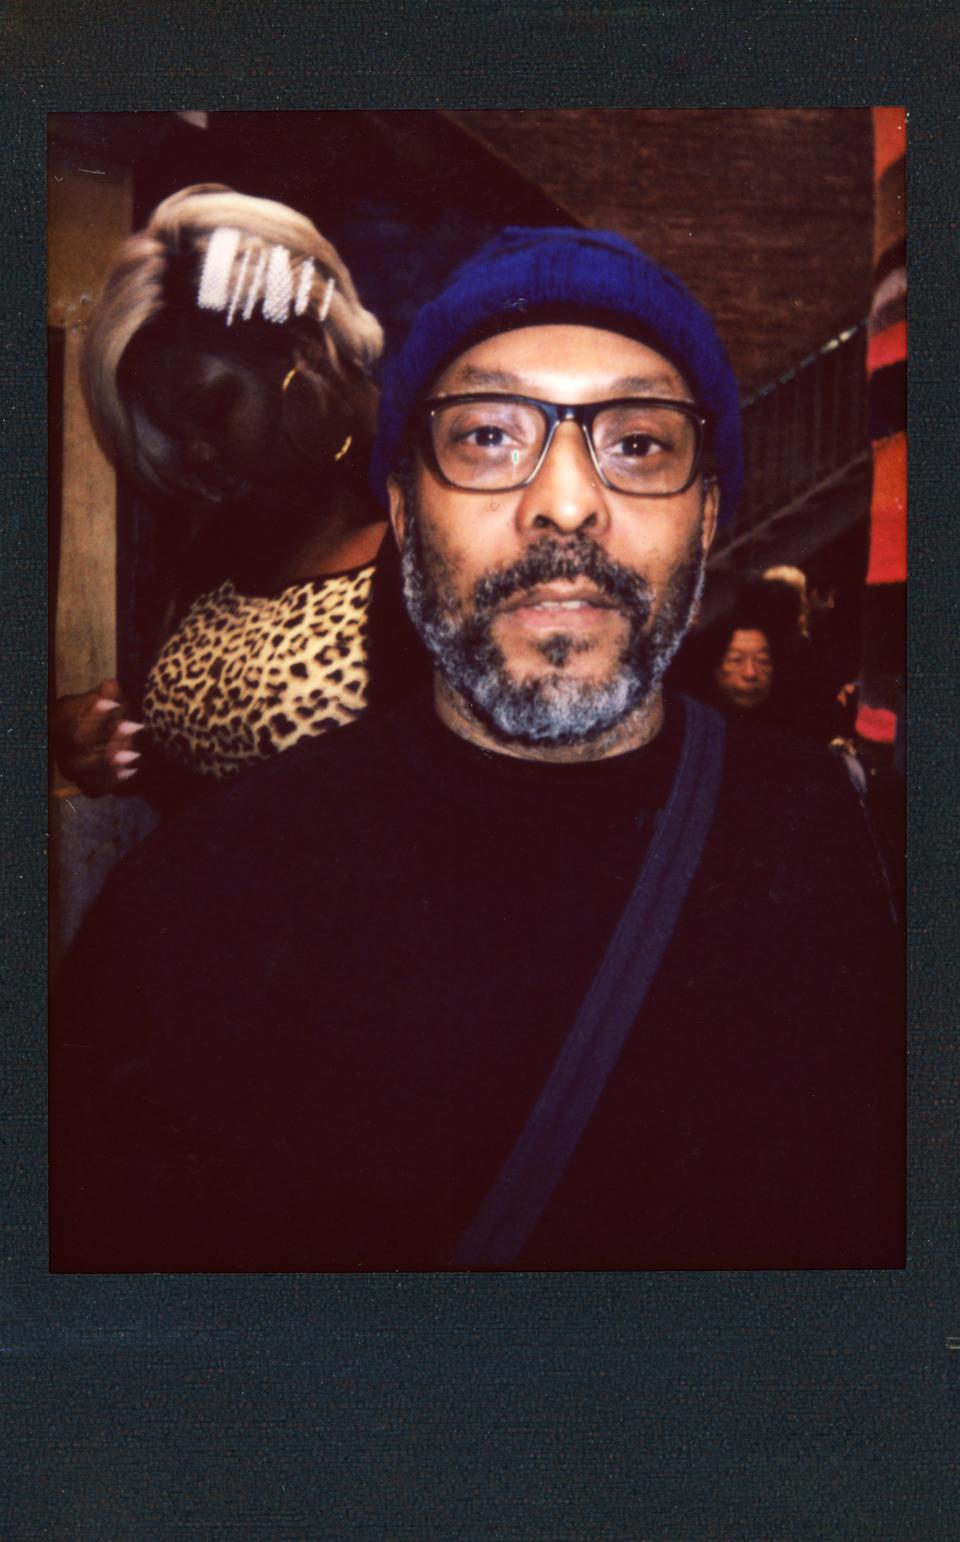 A polaroid of Eric Johnson—some of my longtime NYC friends showed up to celebrate the launch!